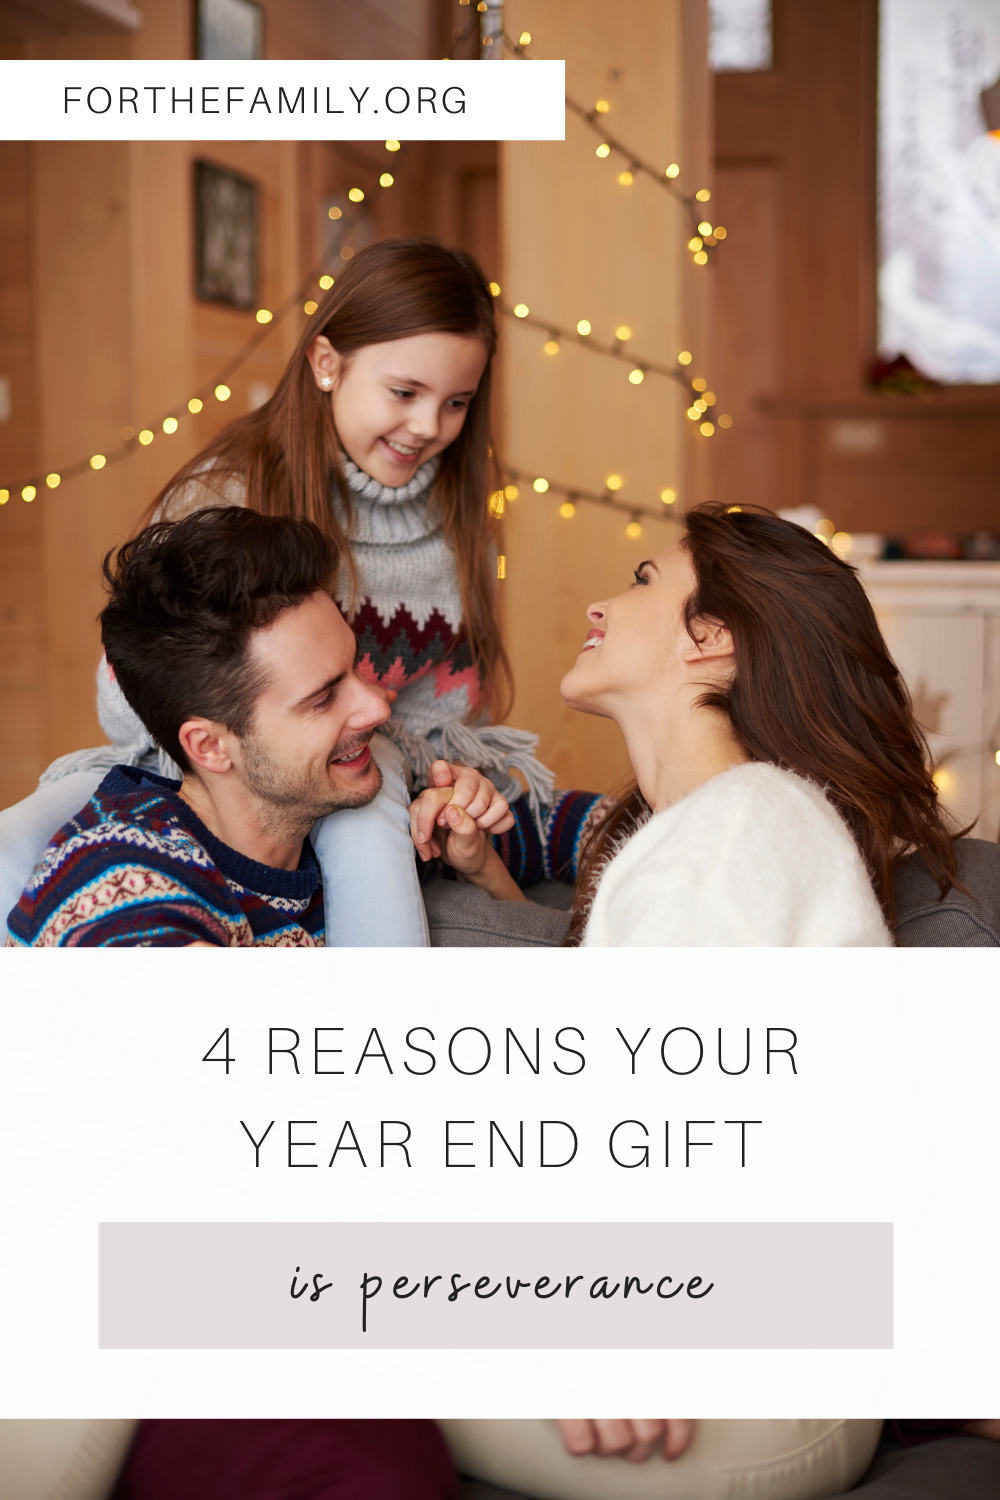 4 Reasons Your Year End Gift is Perseverance